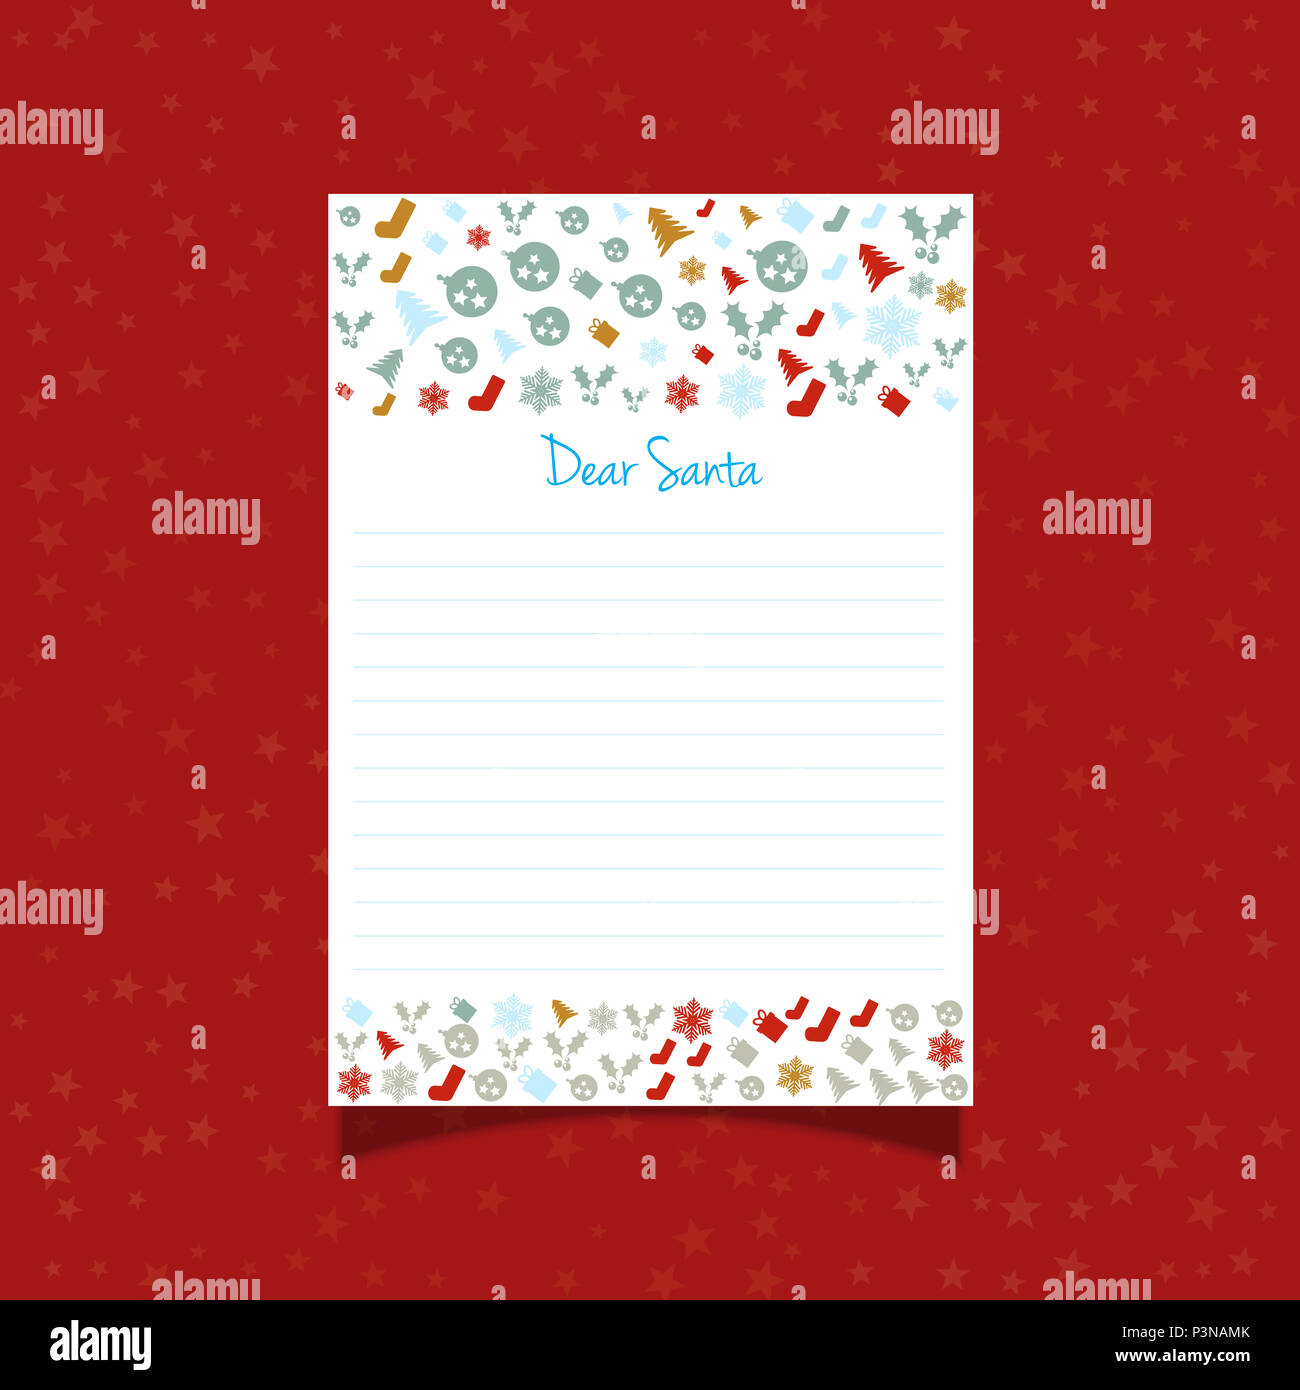 Decorative Christmas letter to Santa with icons Stock Photo